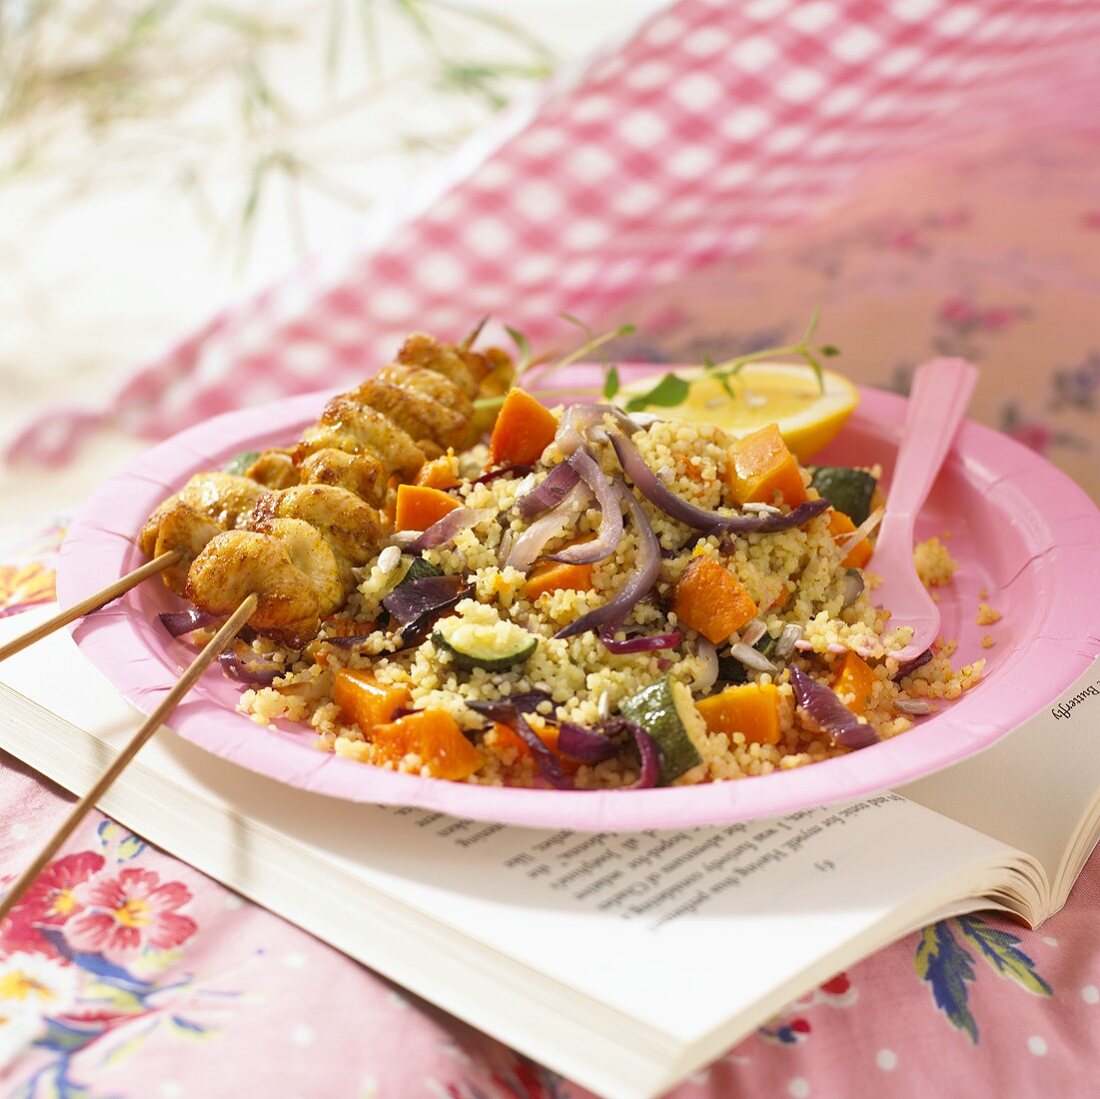 Chicken skewers and couscous with butternut squash for a picnic